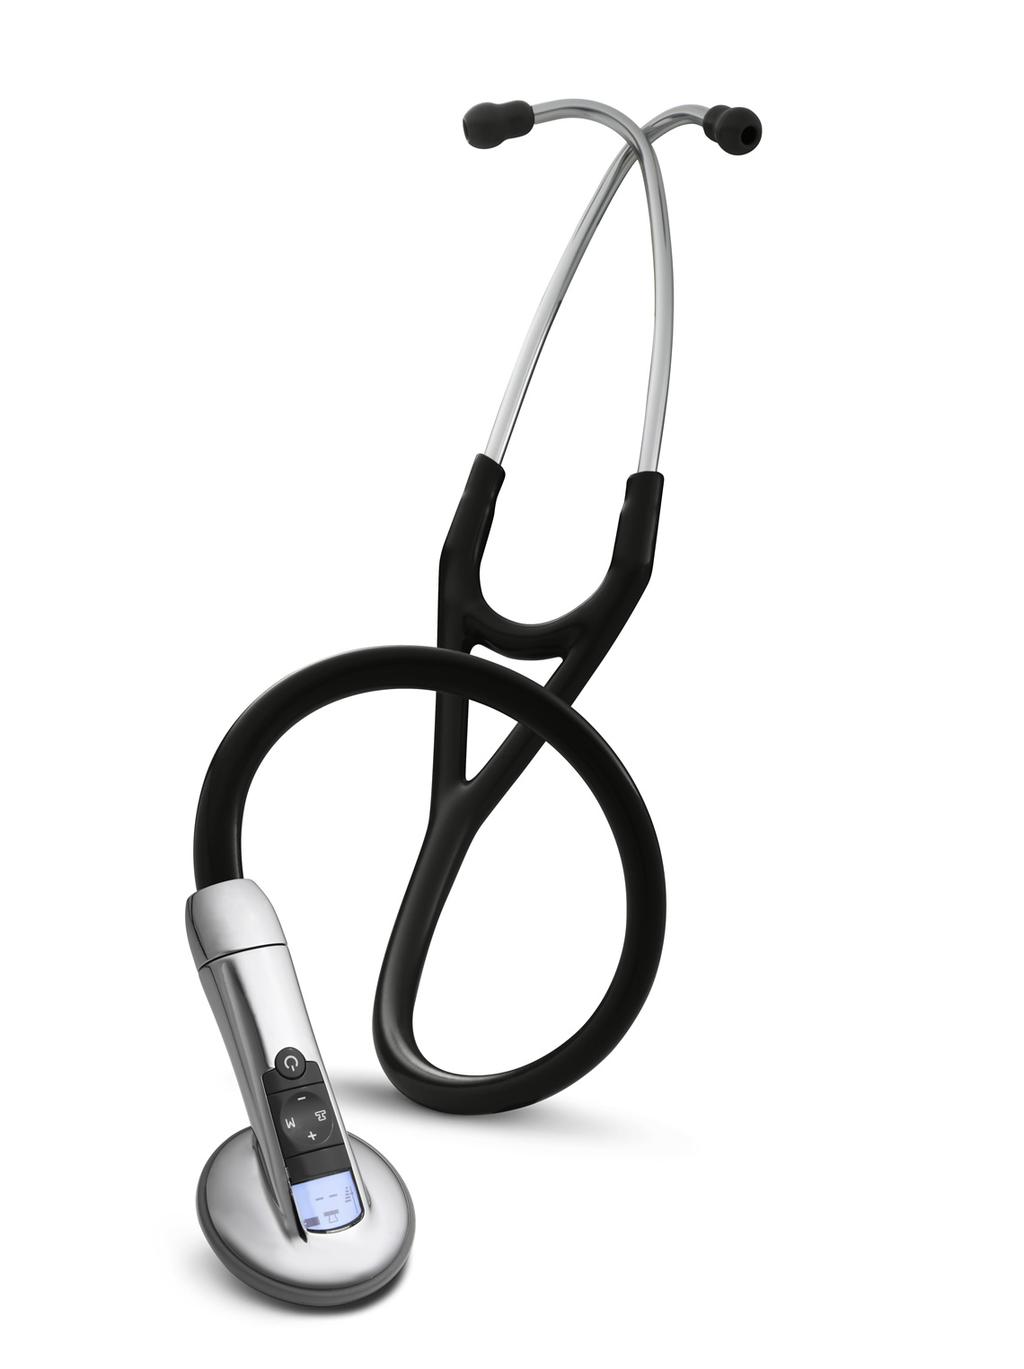 length Not compatible with other heads (stethoscope,